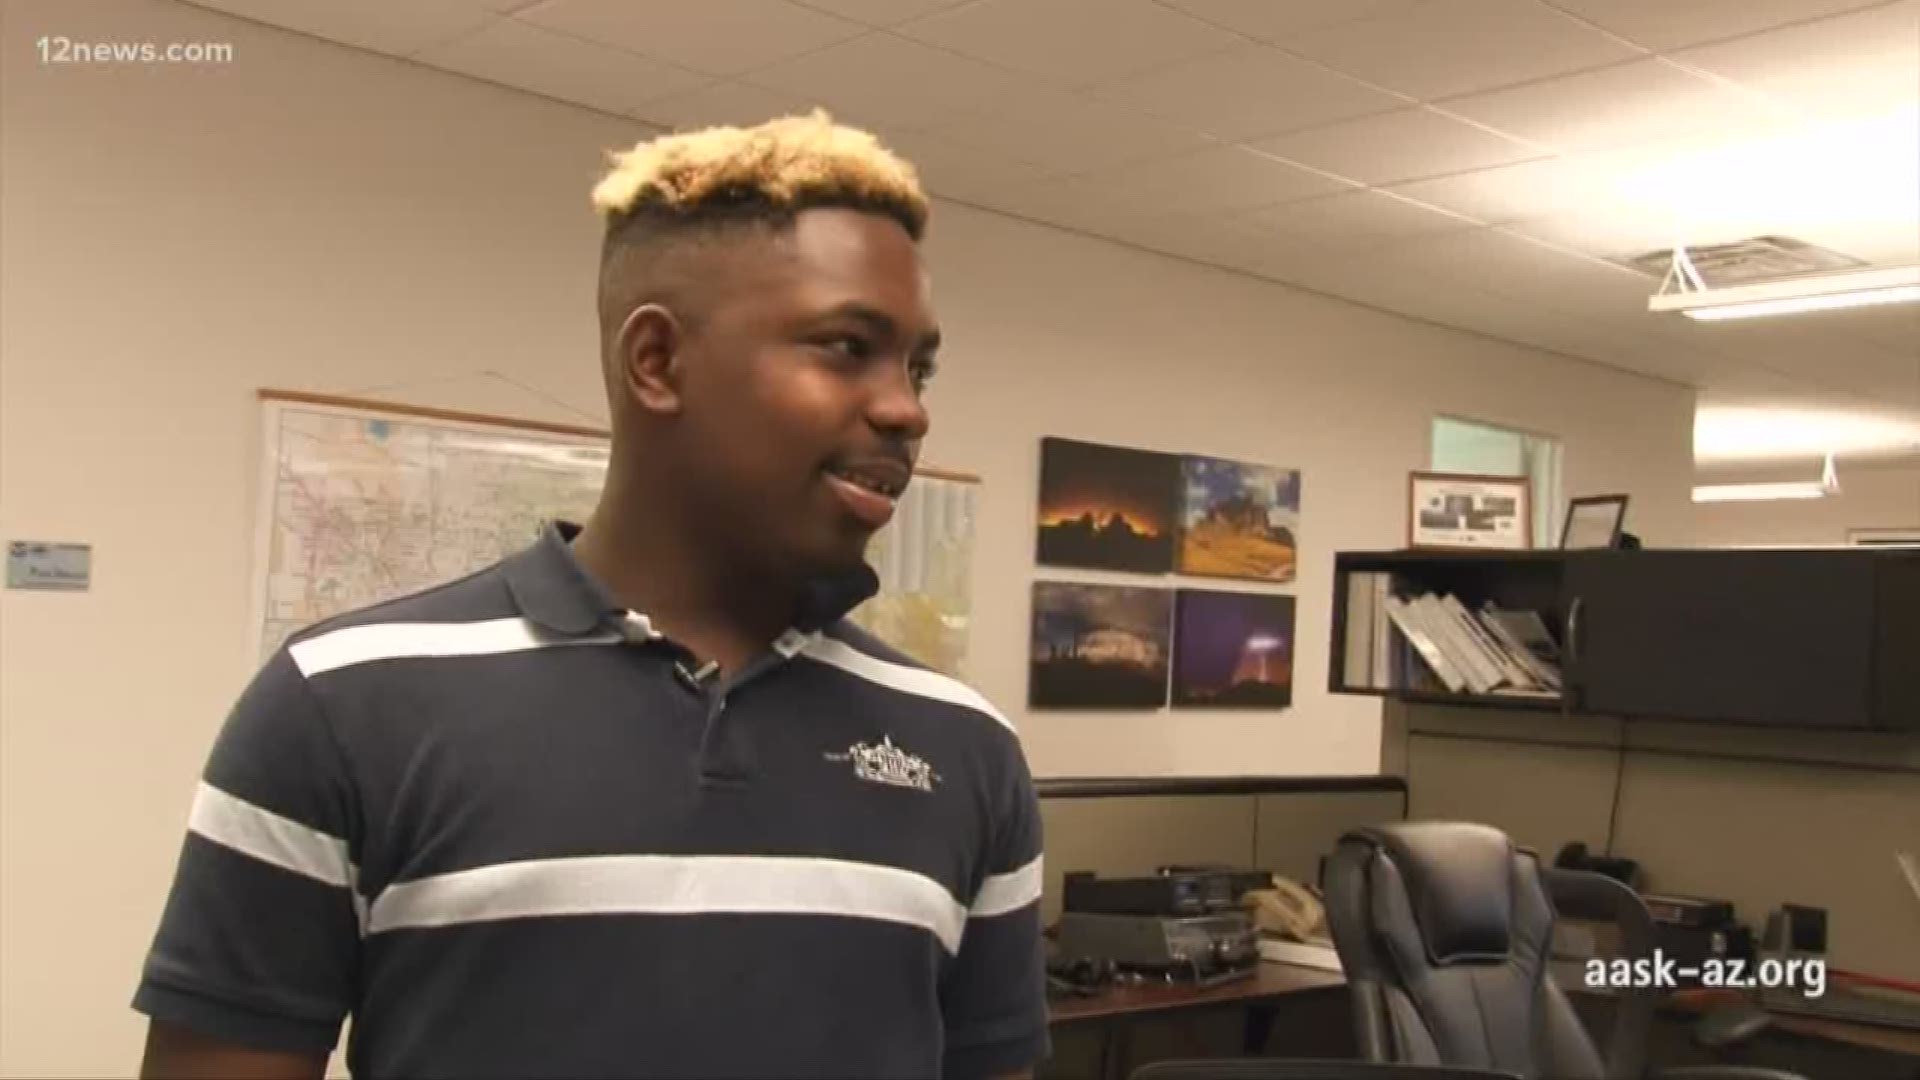 Anthony, a junior in high school, dreams of being a storm chaser and gets involved at the Phoenix National Weather Service. He is in need of a forever home with a father figure as a role model.